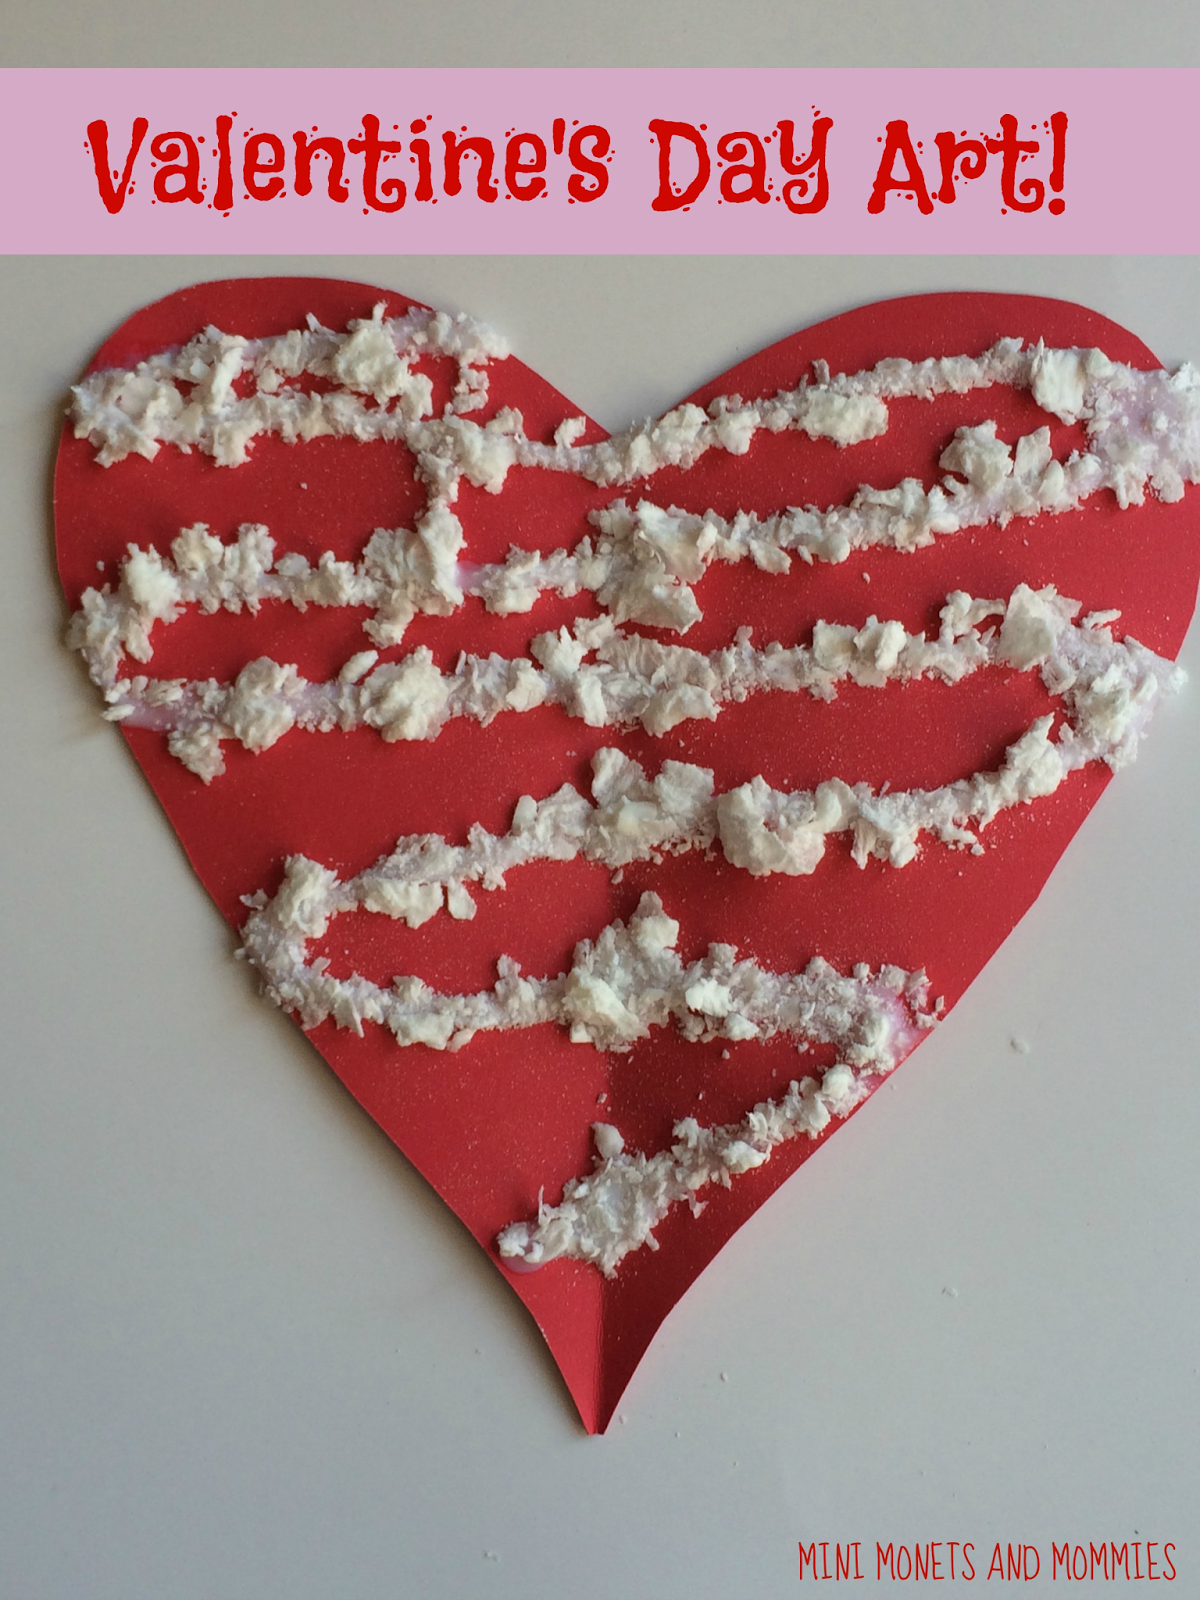 Mini and Mommies Valentine's Day Sensory Art and Science Activity